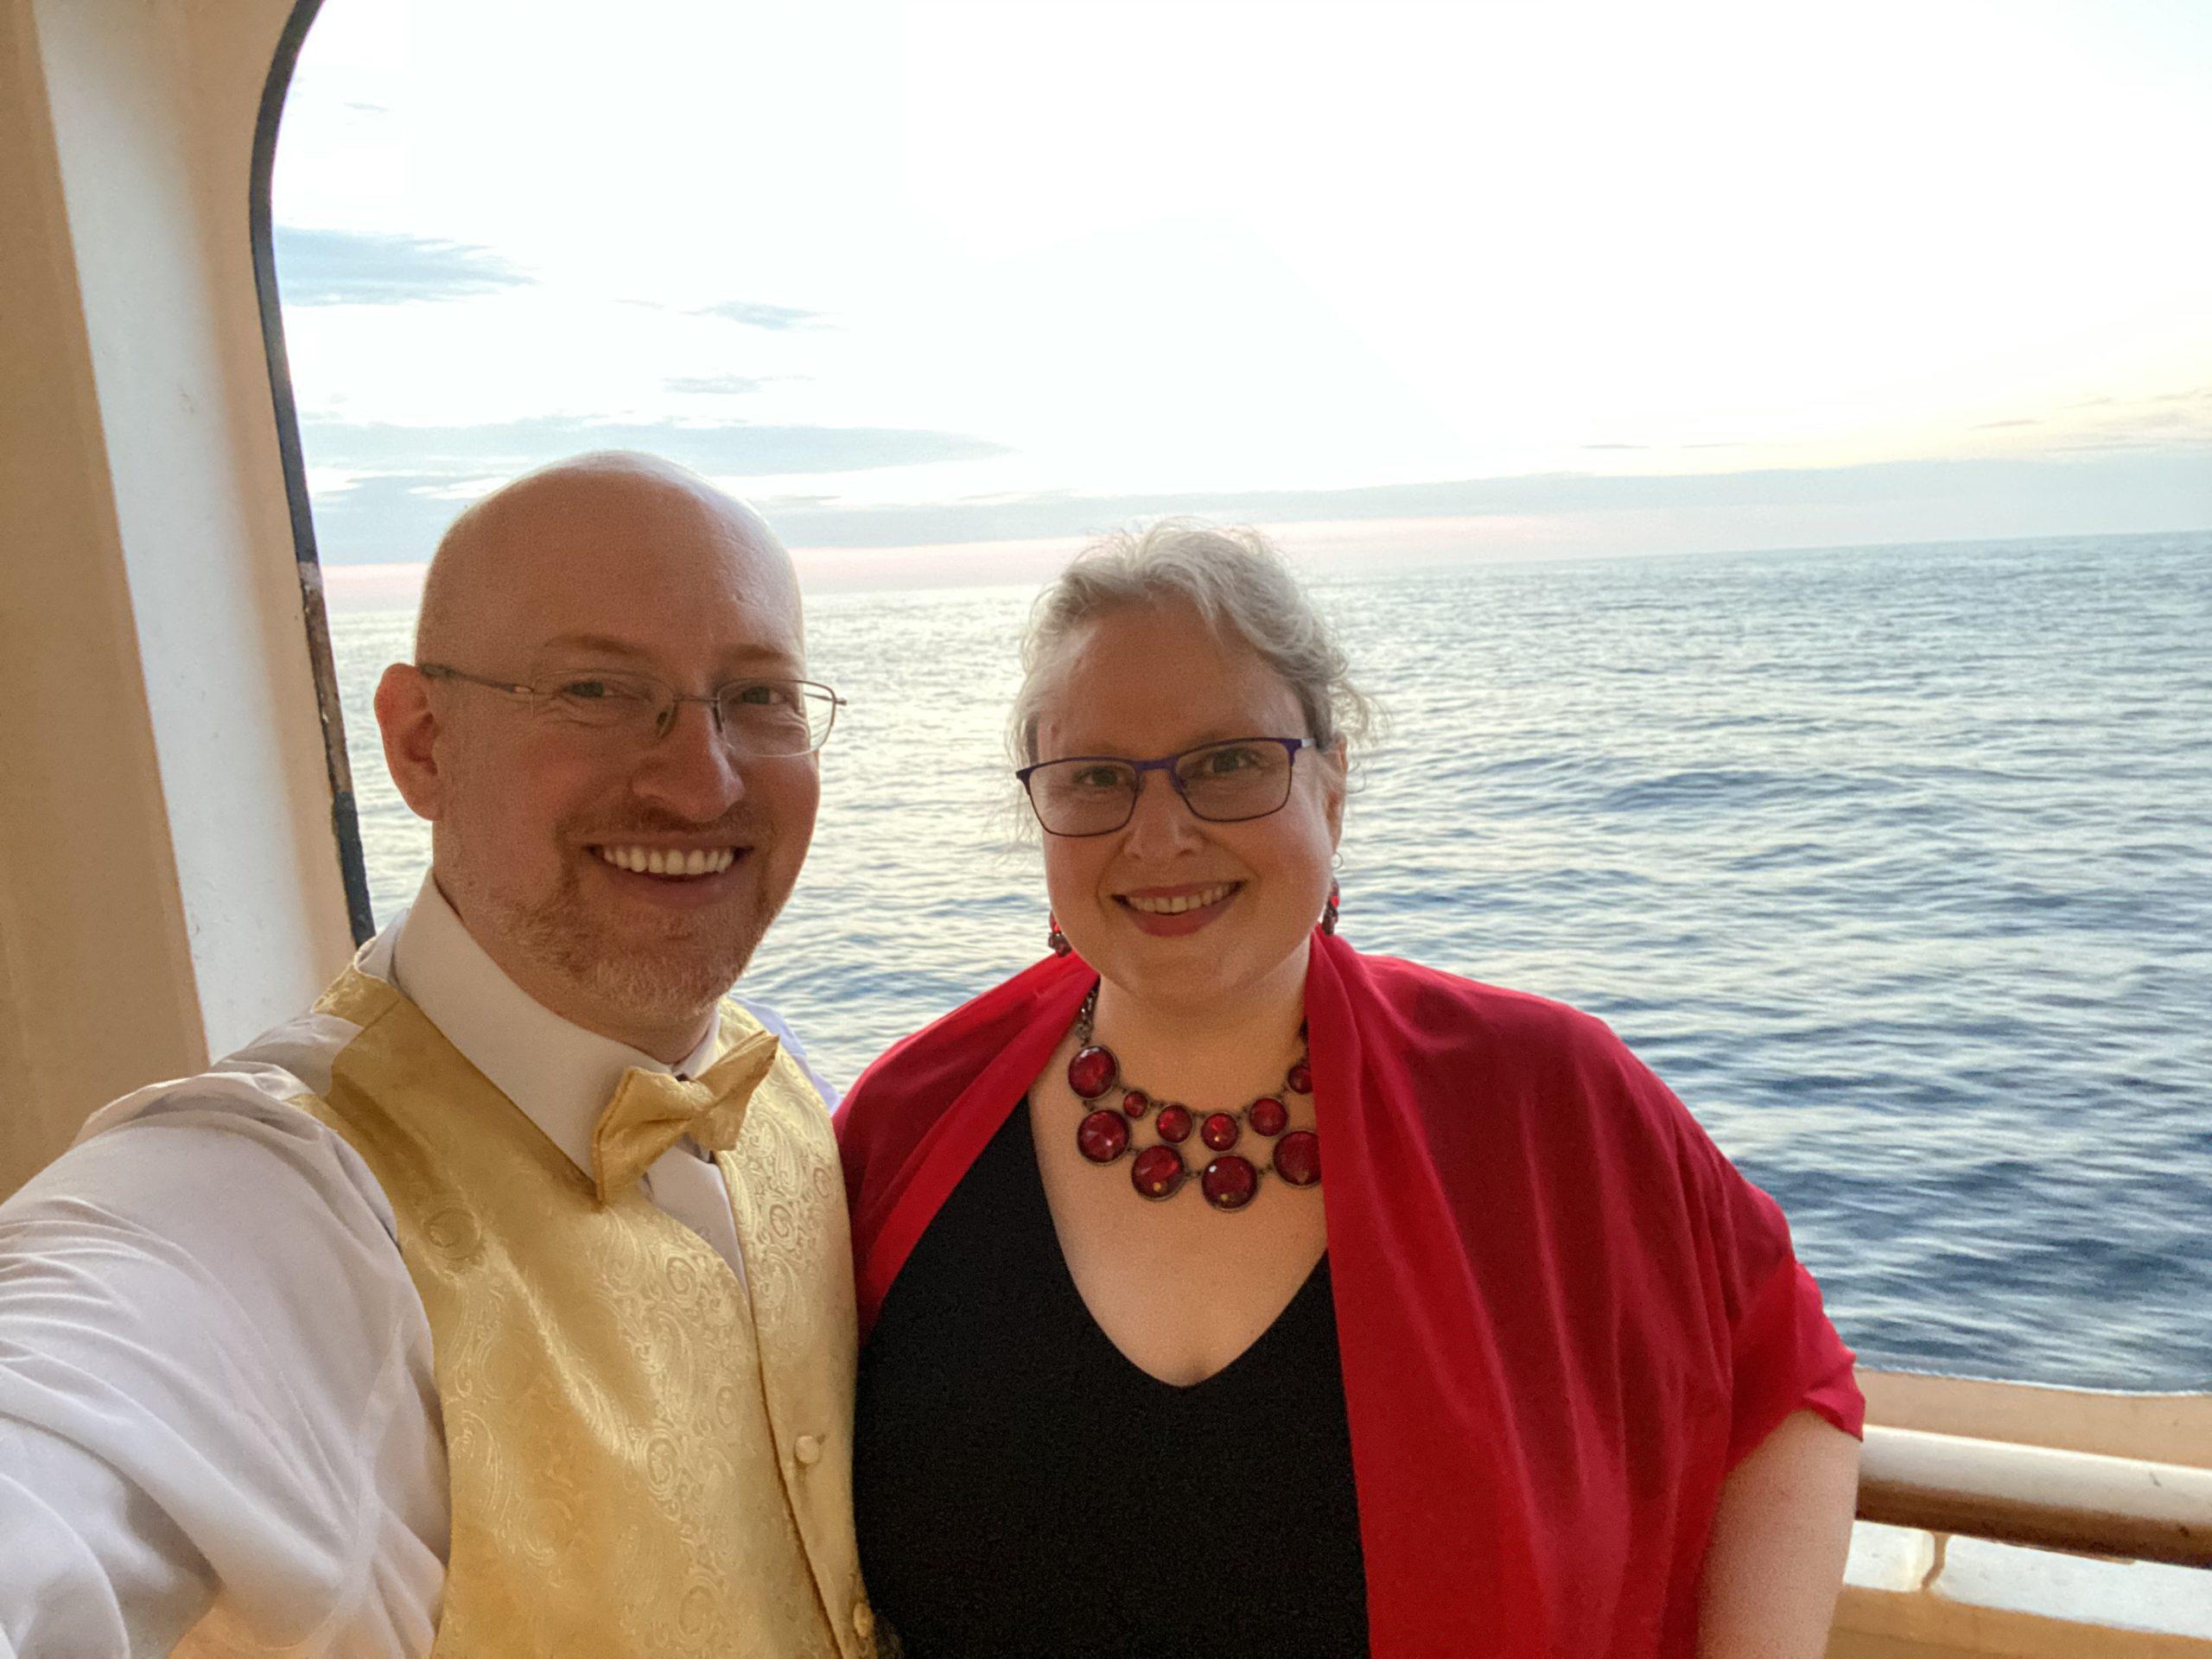 My wife and I in formal dress on the balcony of our stateroom with a calm ocean behind us. I'm wearing a white dress shirt with gold vest and bow tie, she's wearing a black dress with red wrap and jewelry.